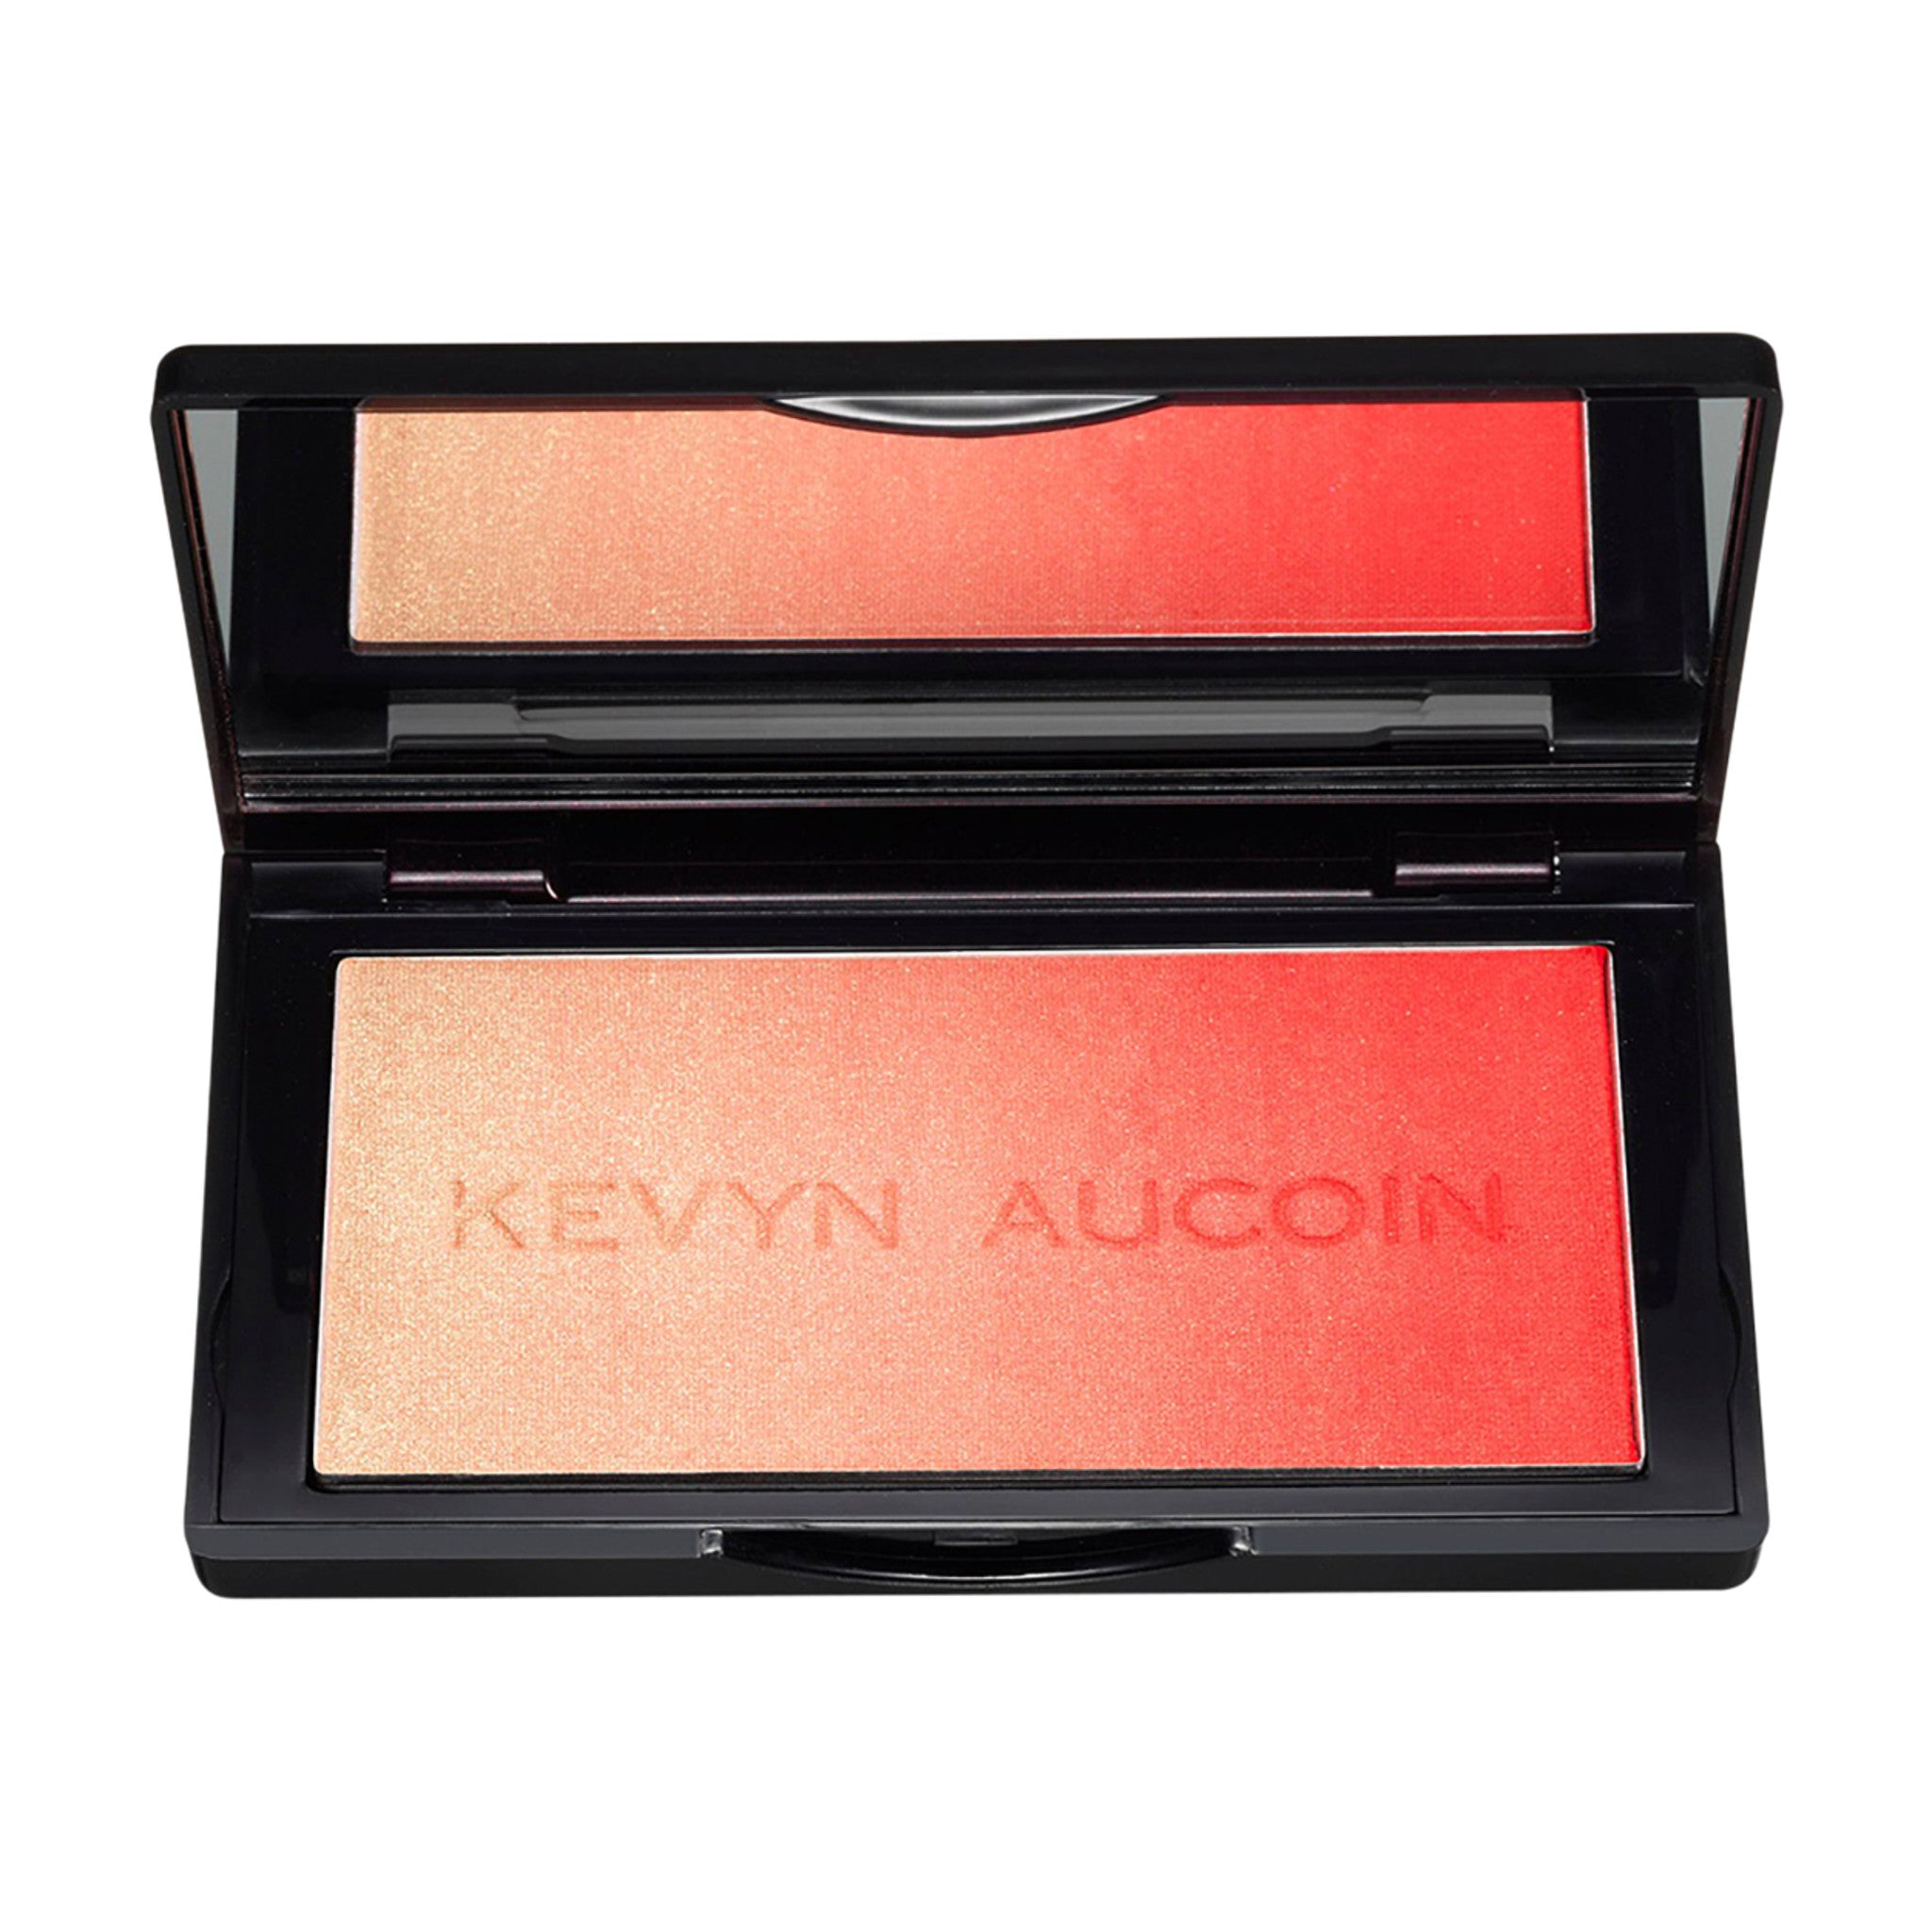 Kevyn Aucoin The Neo-Blush Color/Shade variant: Sunset main image. This product is in the color pink